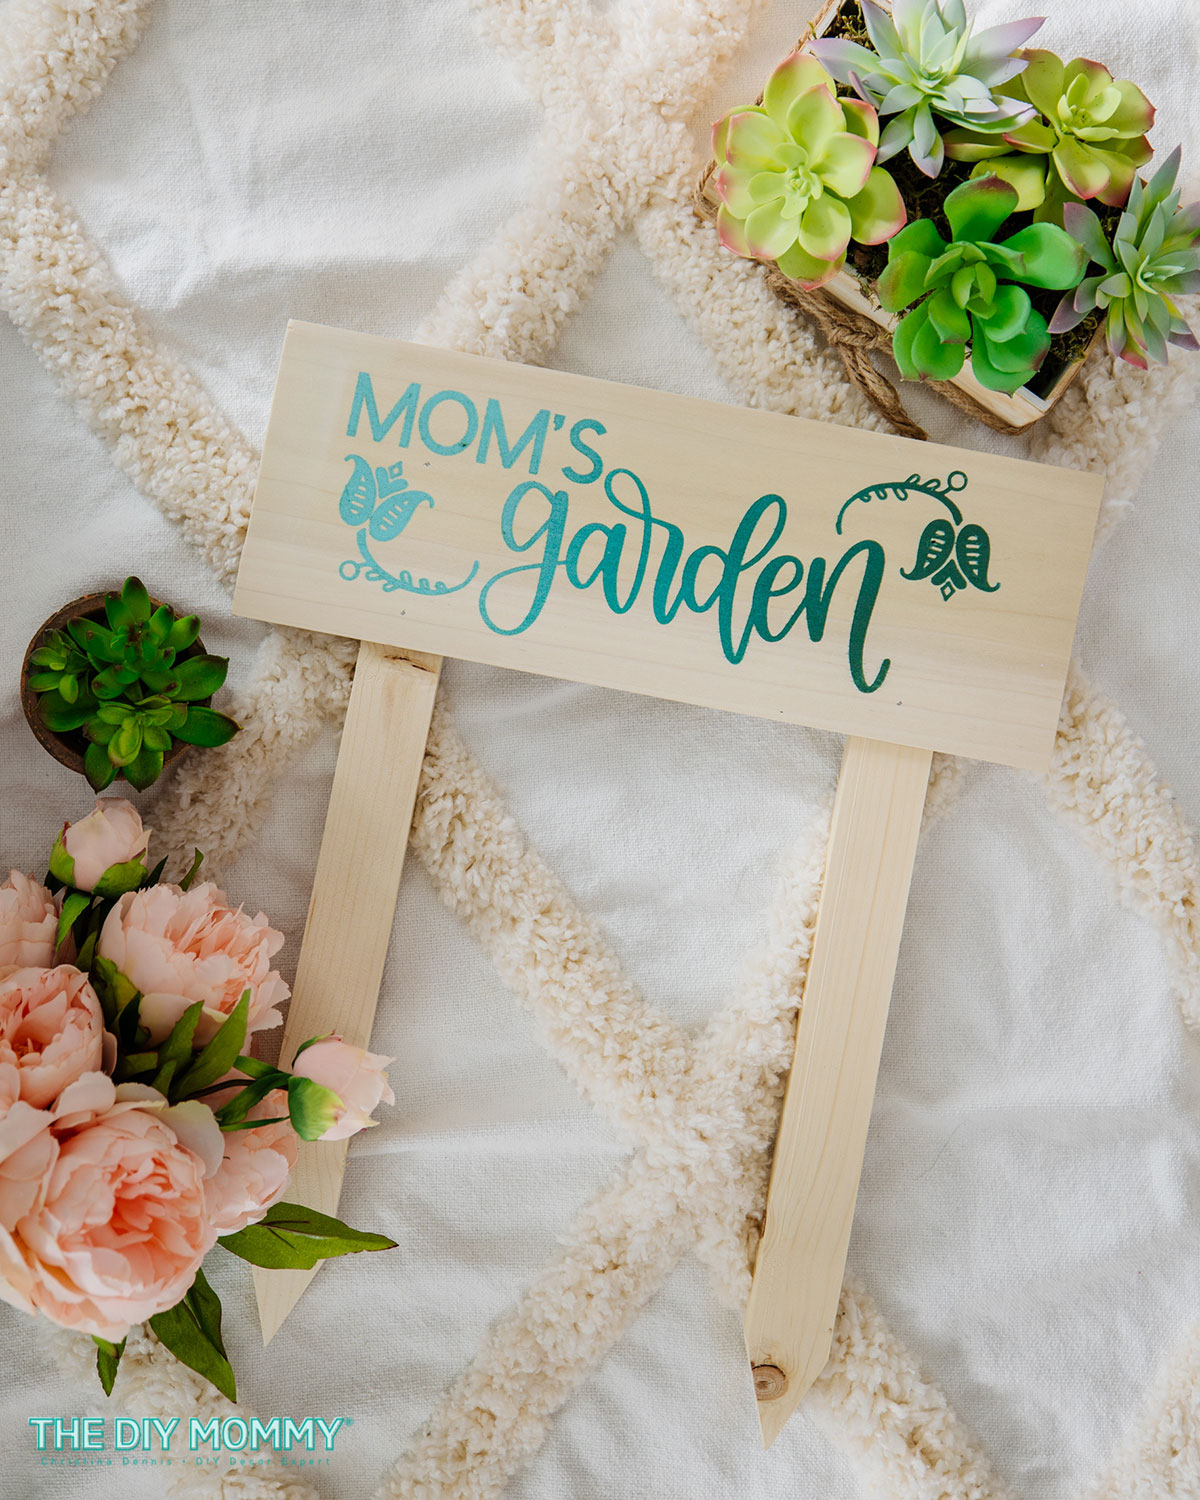 A wooden sign with Mom's Garden in green and teal writing is displayed with flowers.